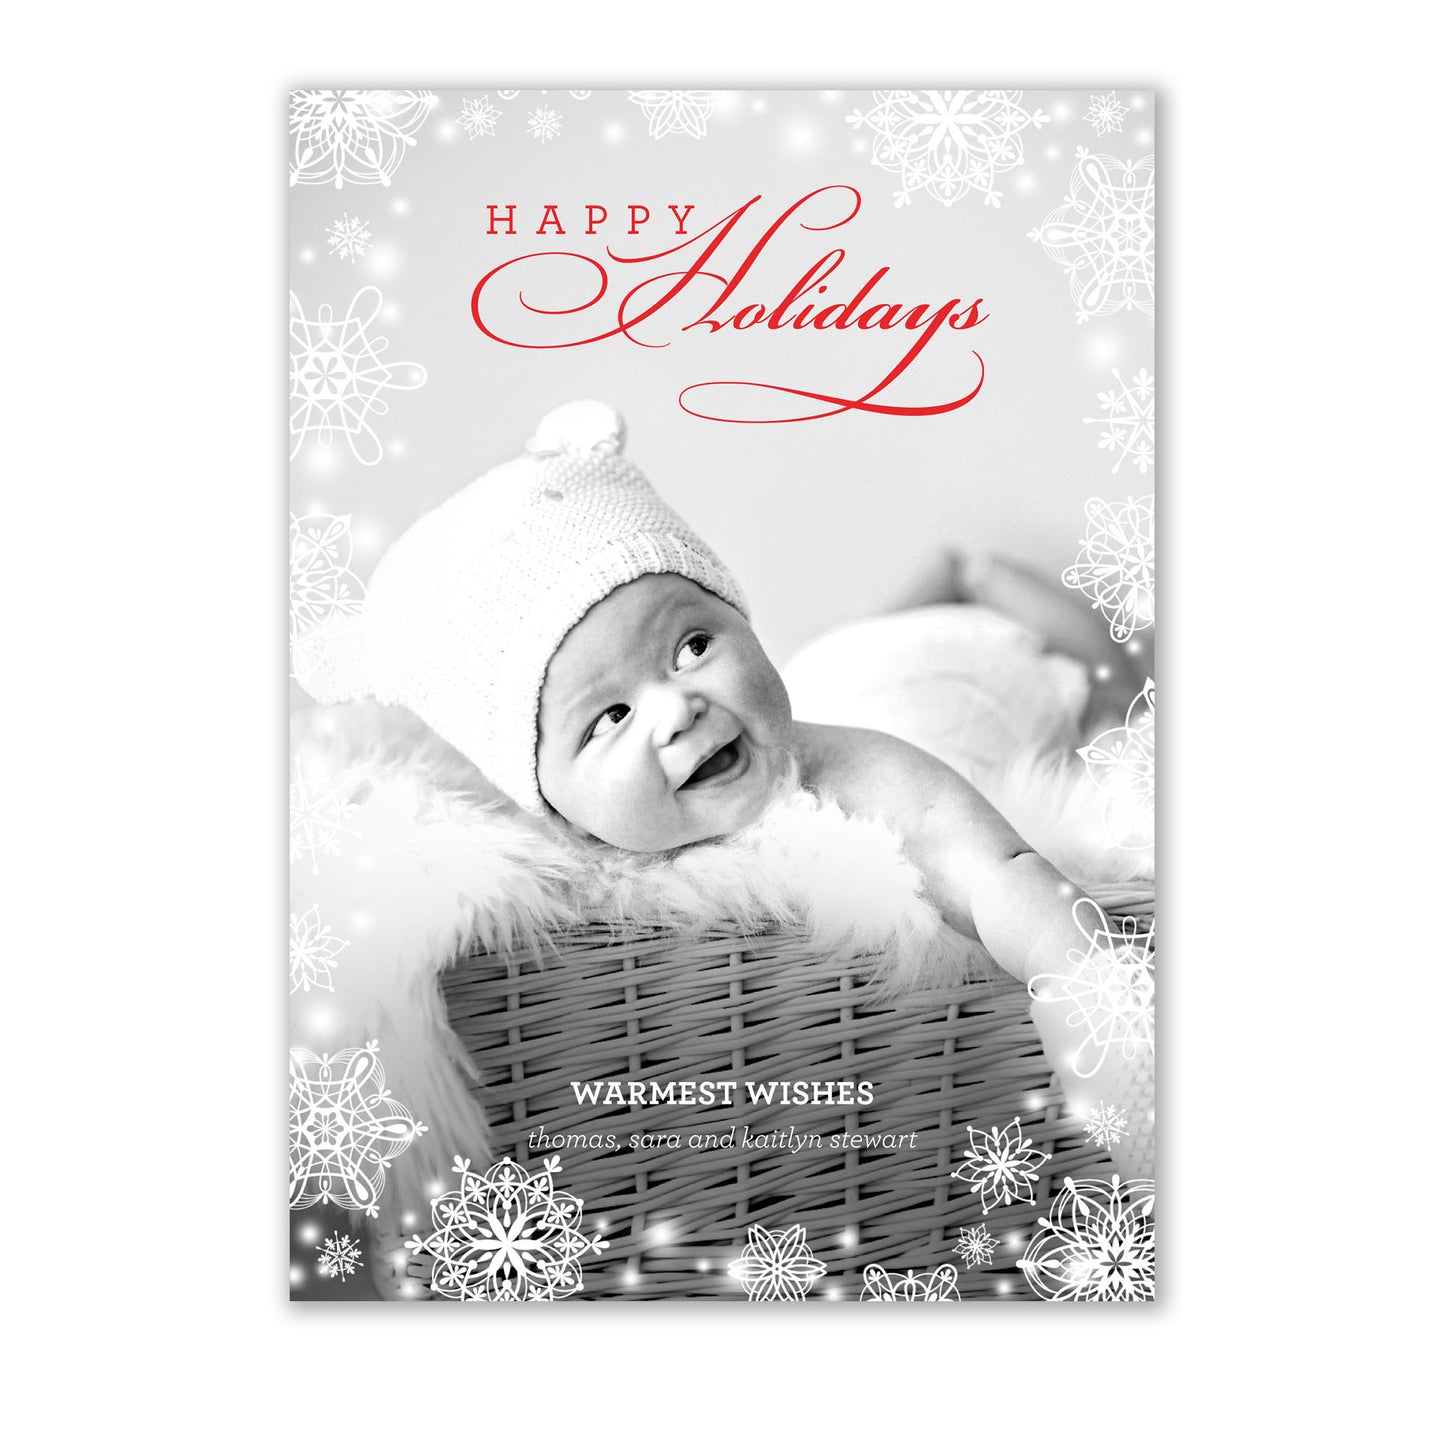 A Noteworthy Sparkling Snowflakes Photo Card featuring a baby in a basket surrounded by snowflakes.